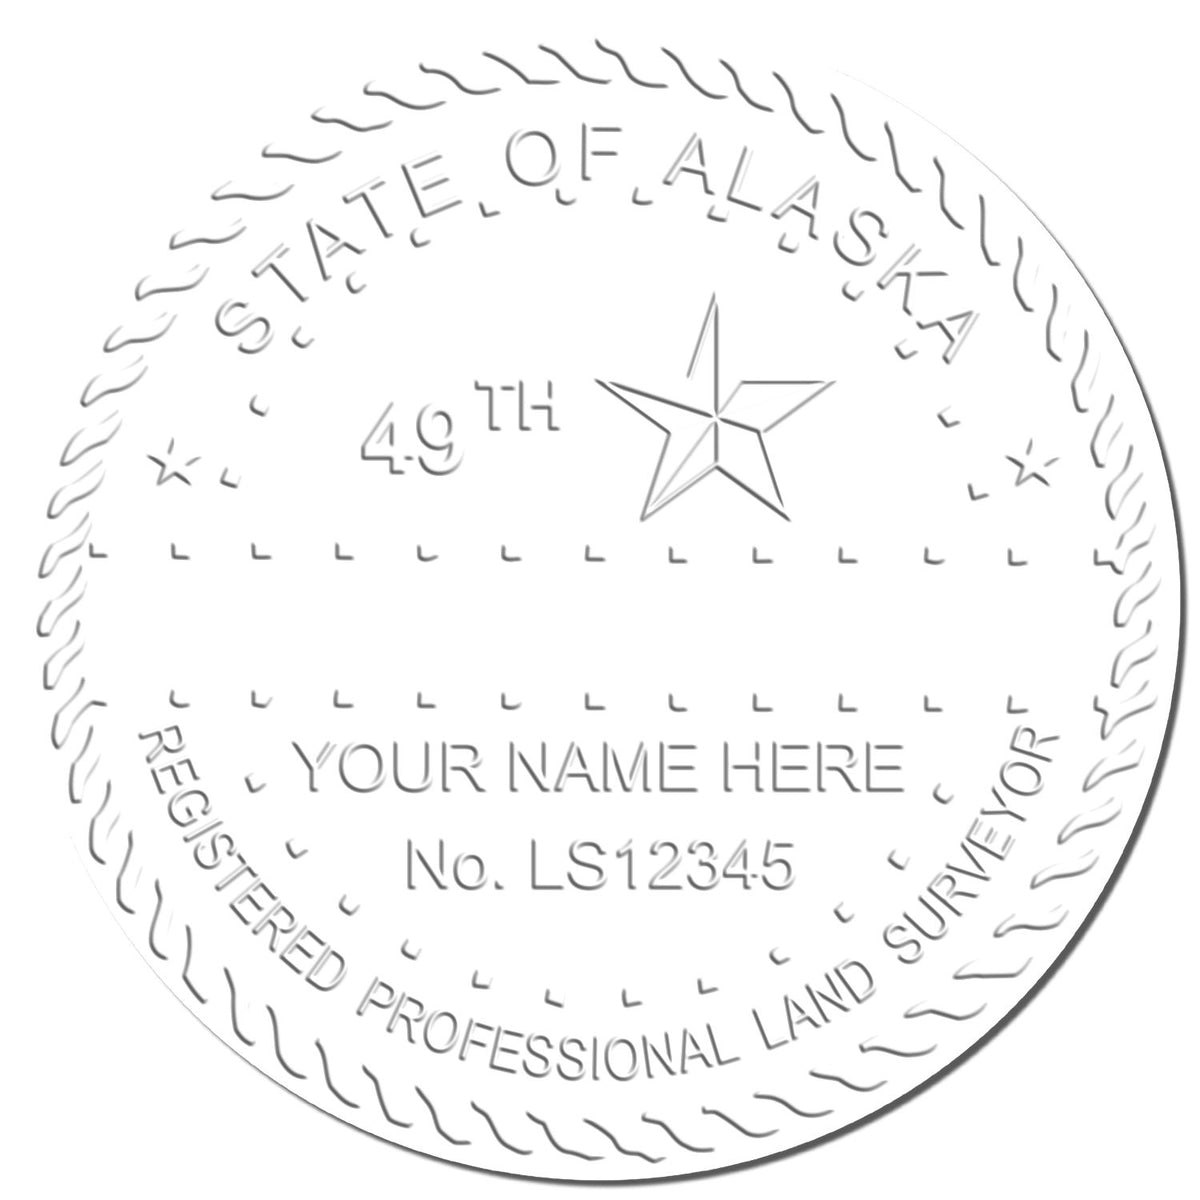 This paper is stamped with a sample imprint of the Hybrid Alaska Land Surveyor Seal, signifying its quality and reliability.